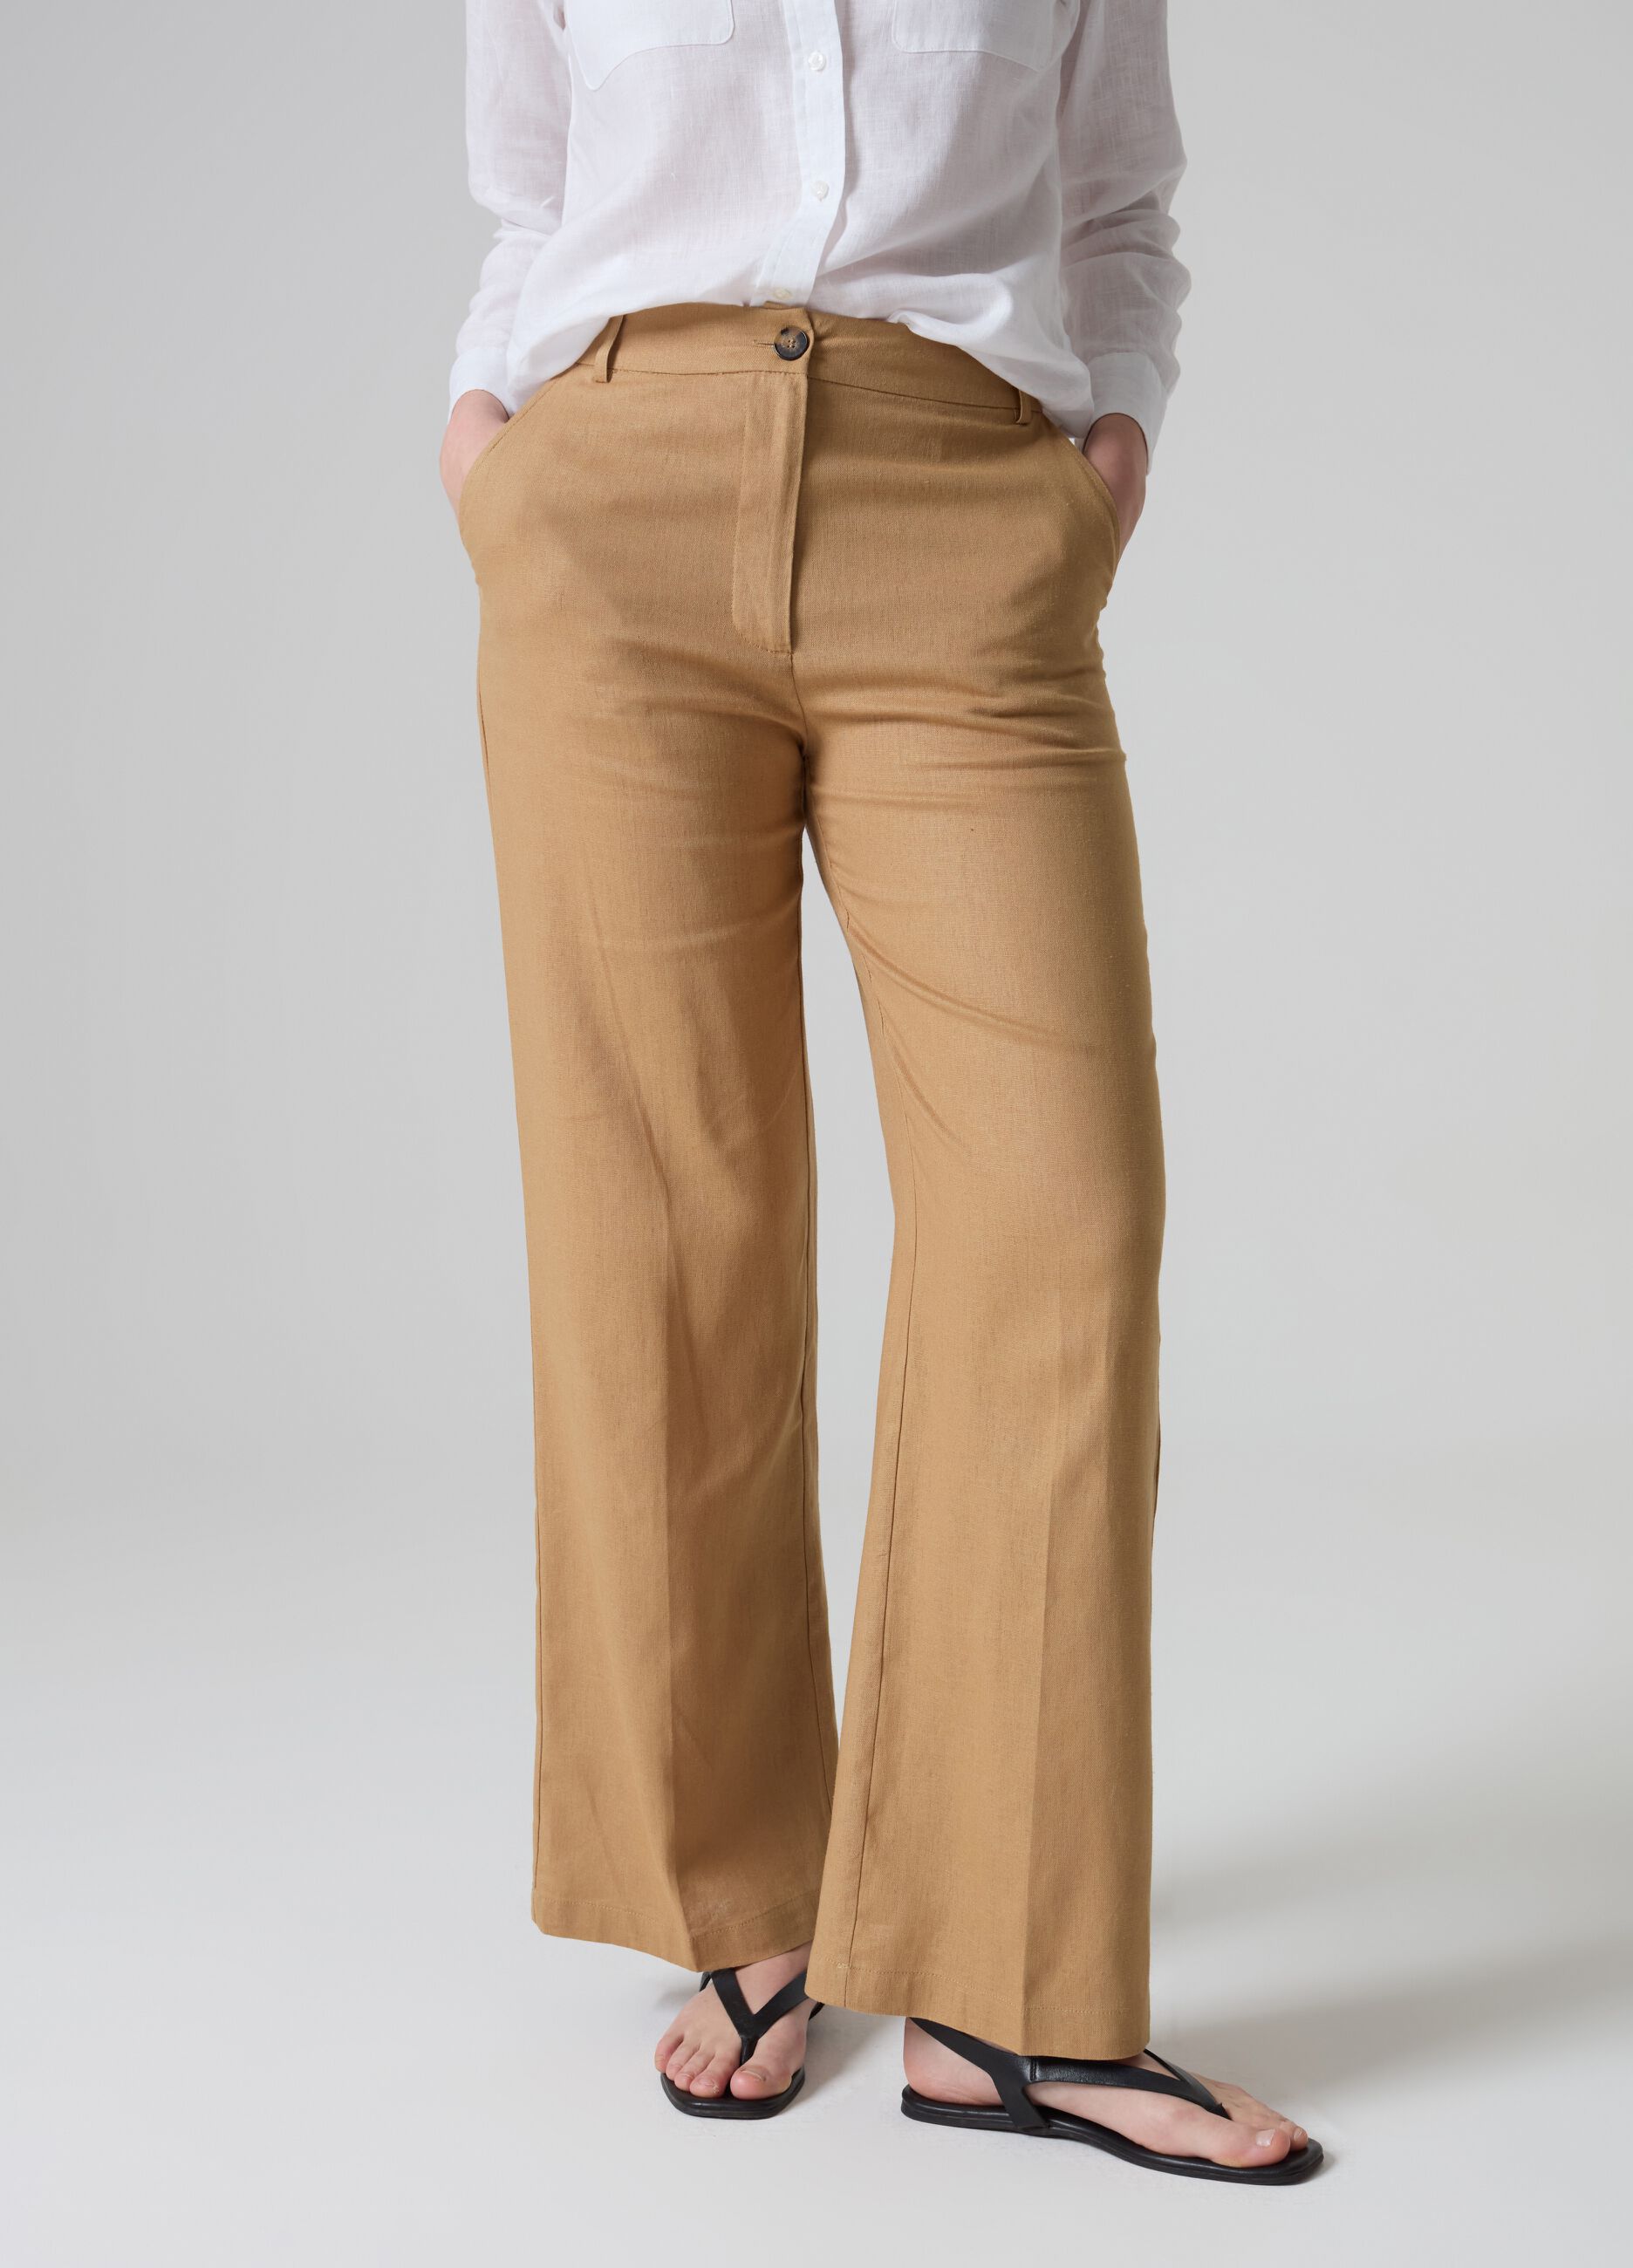 Contemporary wide-leg palazzo trousers